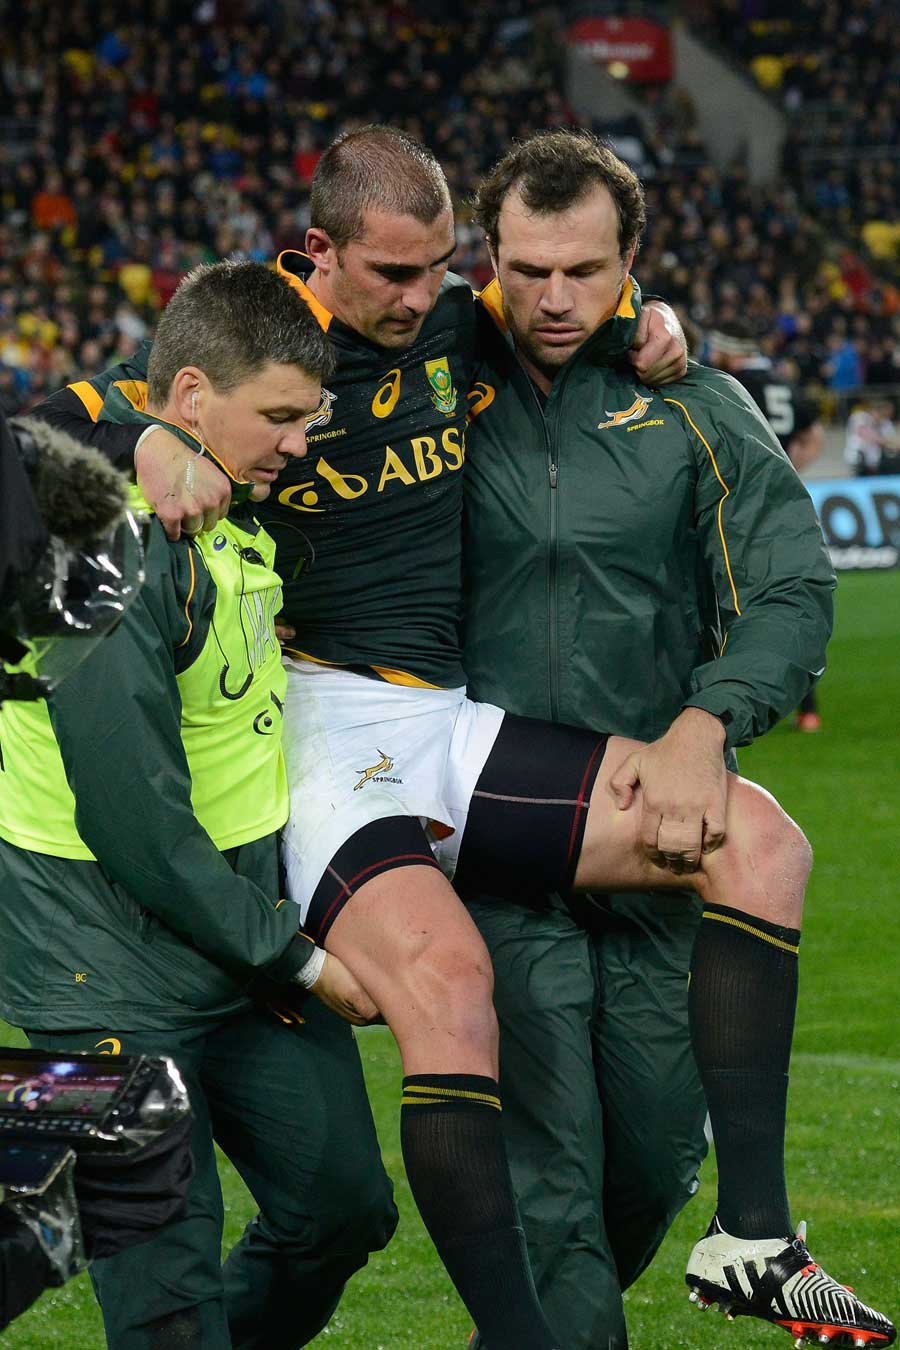 South Africa's Ruan Pienaar is carried from the pitch